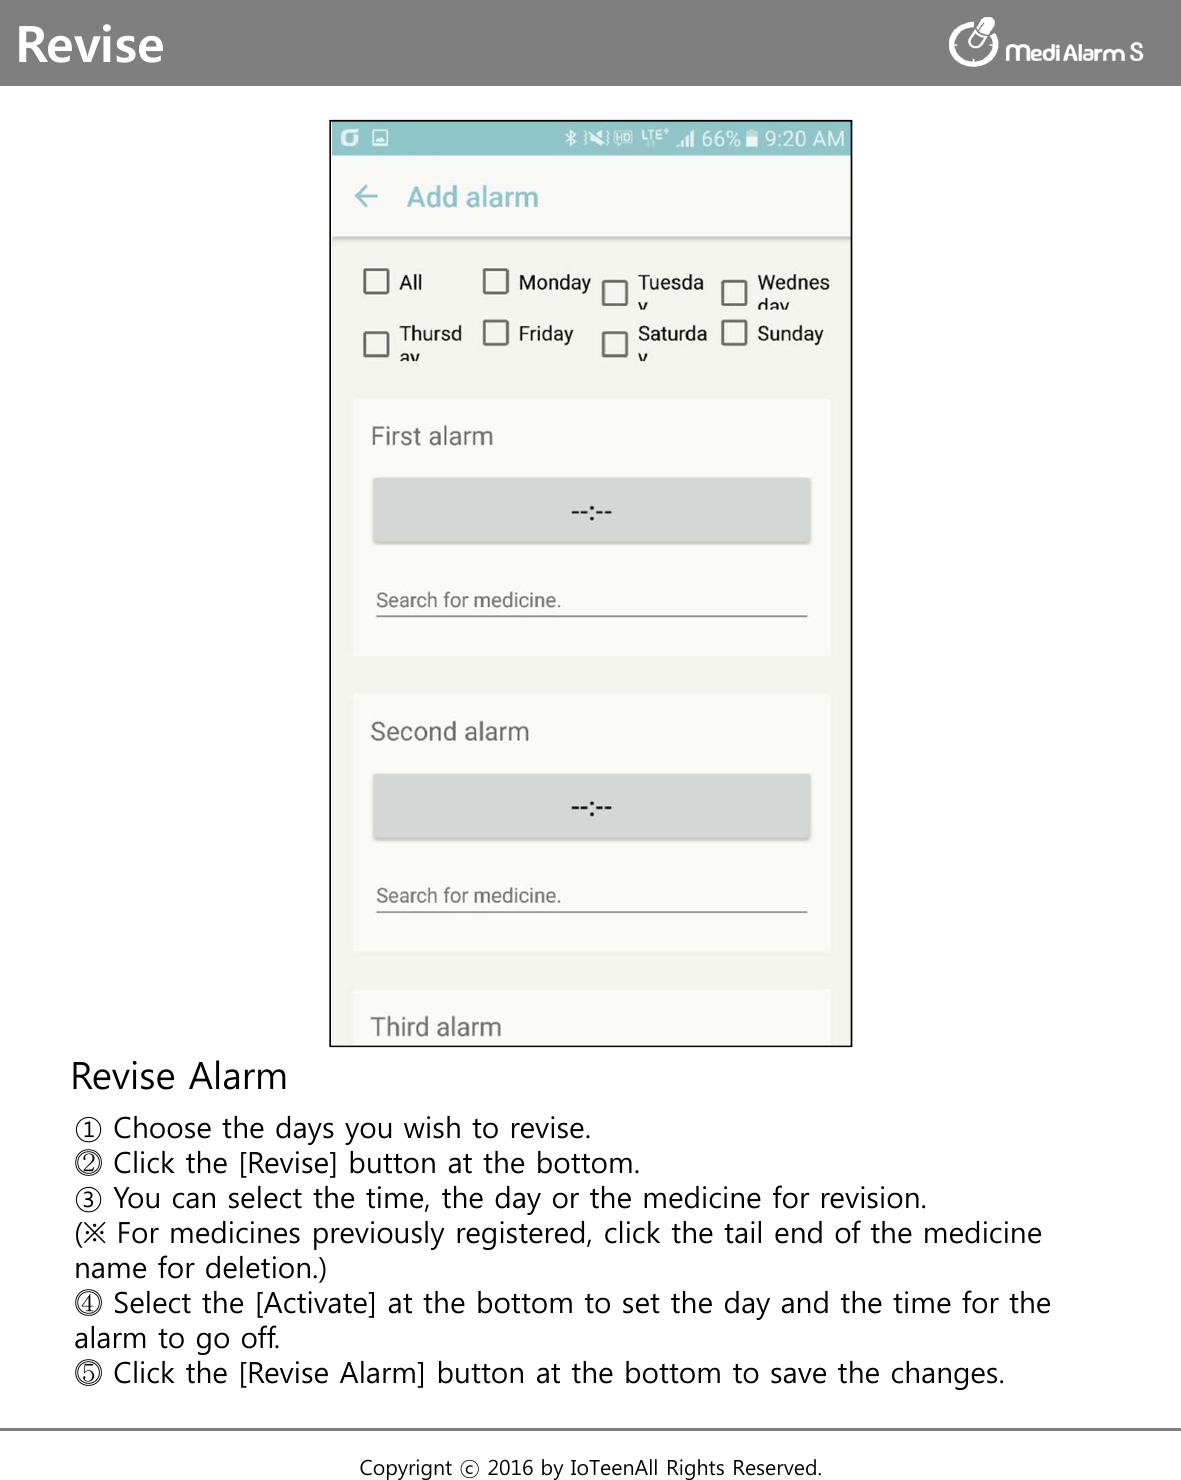 Revise Alarm① Choose the days you wish to revise.⓶Click the [Revise] button at the bottom.③ You can select the time, the day or the medicine for revision. (※ For medicines previously registered, click the tail end of the medicine name for deletion.)⓸Select the [Activate] at the bottom to set the day and the time for the alarm to go off.⓹Click the [Revise Alarm] button at the bottom to save the changes.ReviseCopyrignt ⓒ 2016 by IoTeenAll Rights Reserved. 